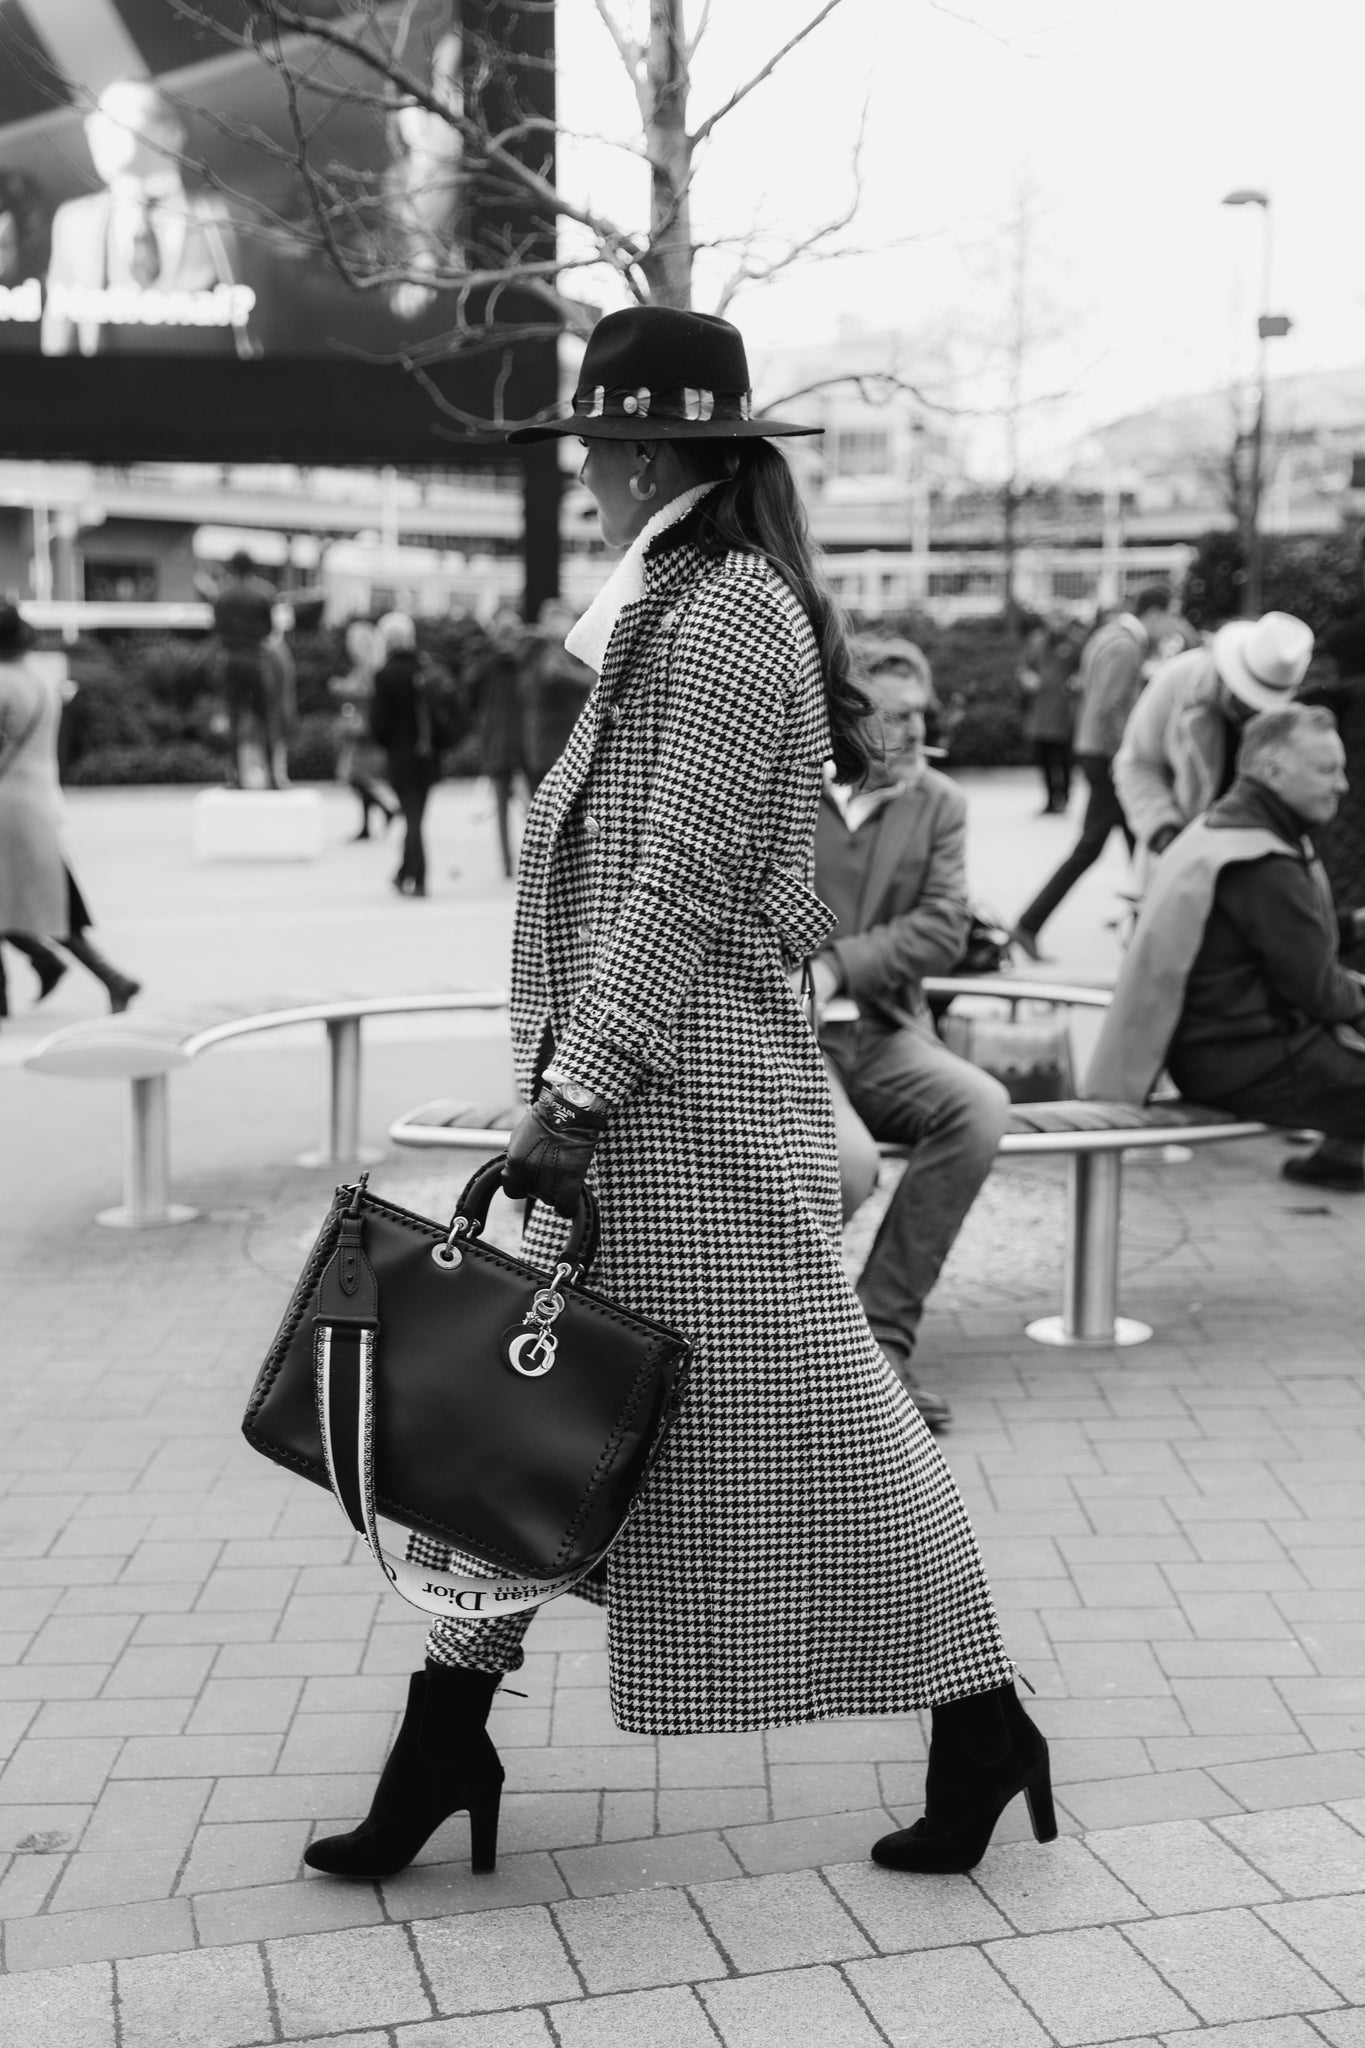 Black and White image of women wearing tribly hat, houndstooth coat carrying black bag